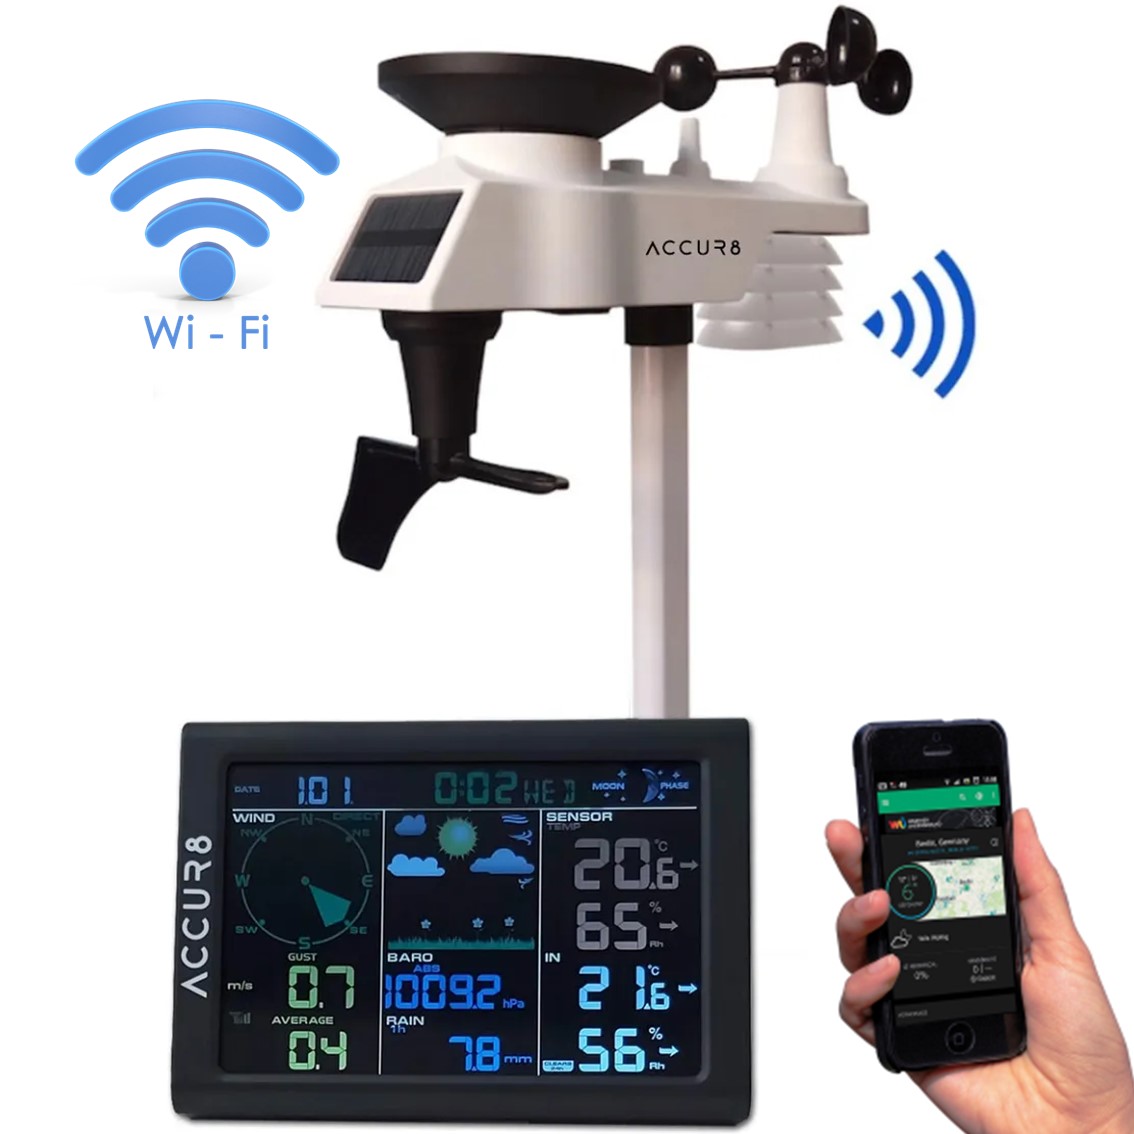 https://www.tempcon.co.uk/media/wysiwyg/WeatherShop/ACCUR8/ACCUR8_DWS5100_with_mobile_app_wifi_images_3.jpg